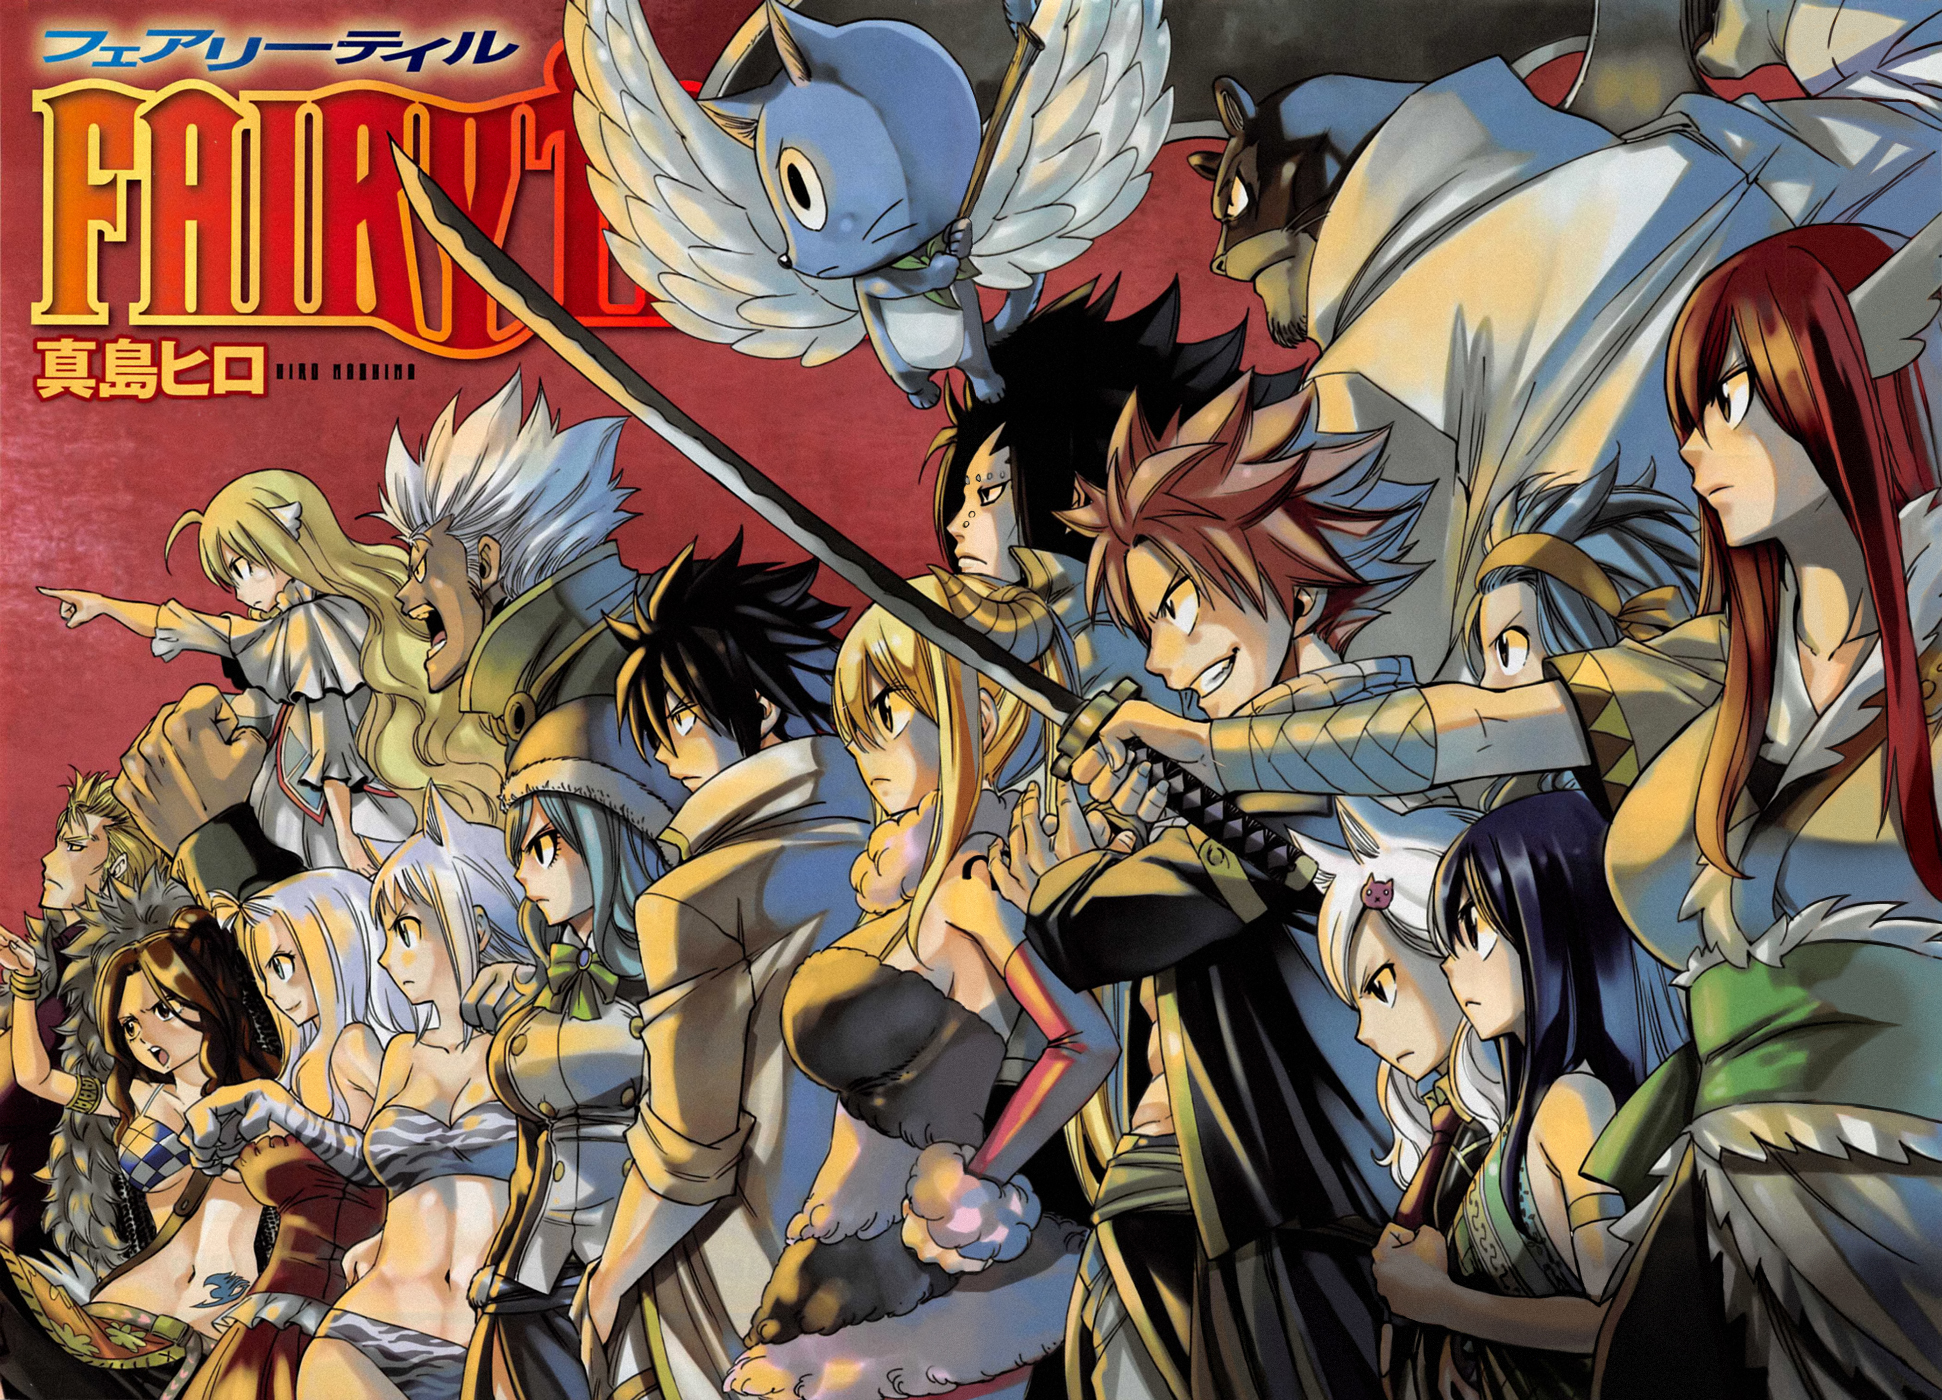 Fairy Tail Manga Currently in Final Arc